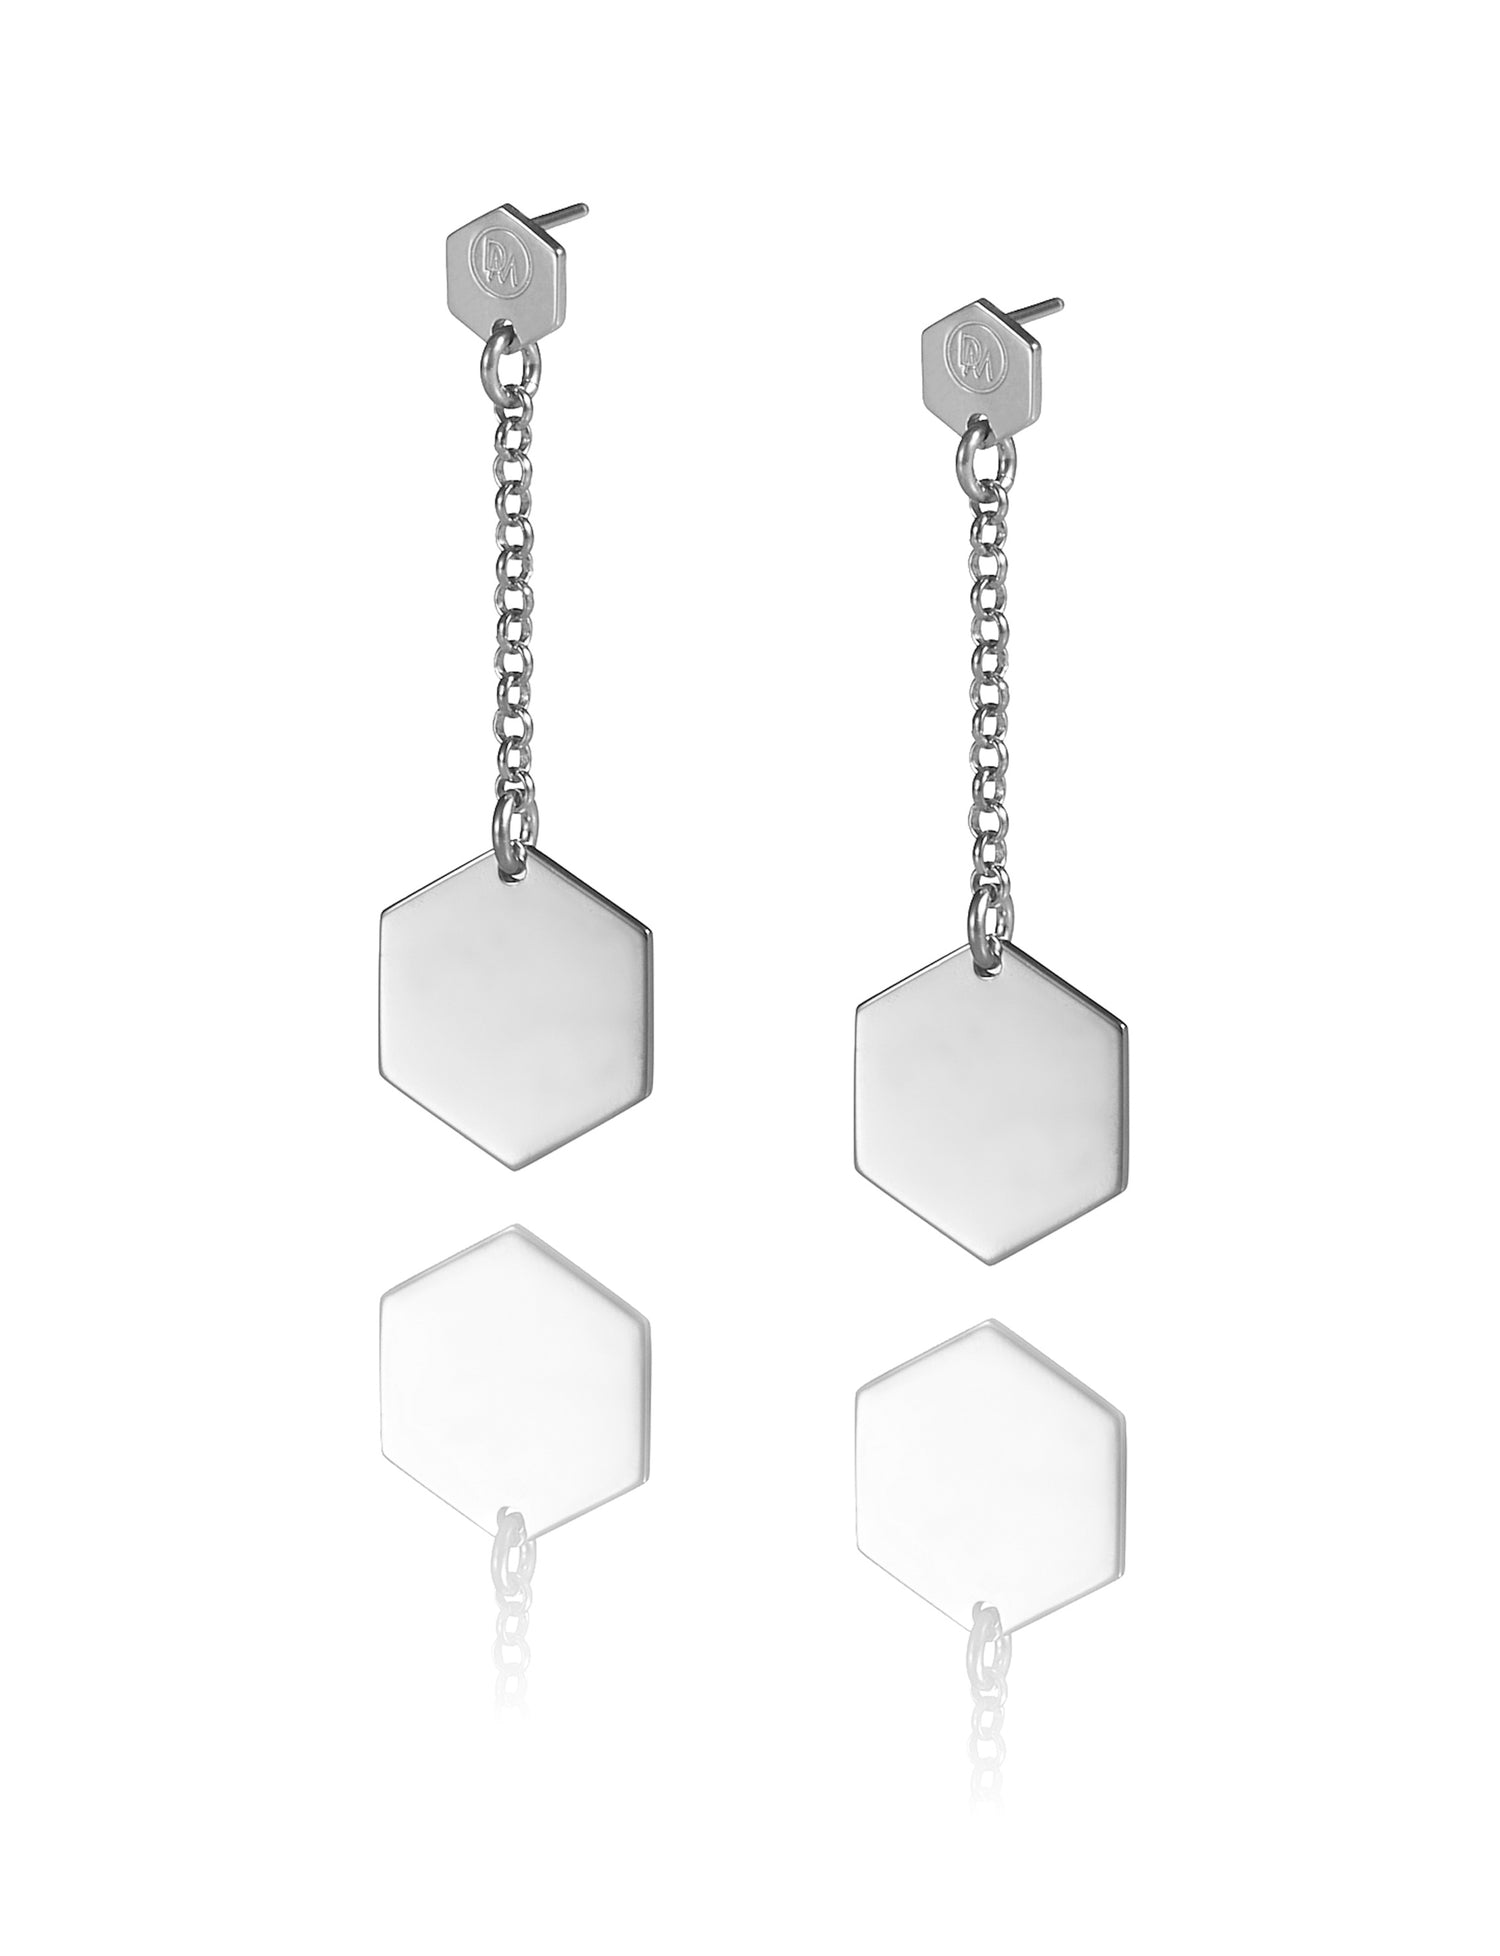 Minimalist and playful Cell earrings with hexagon-shaped pendants from iconic Cell collection by David&Martin.  Material: 925 silver.